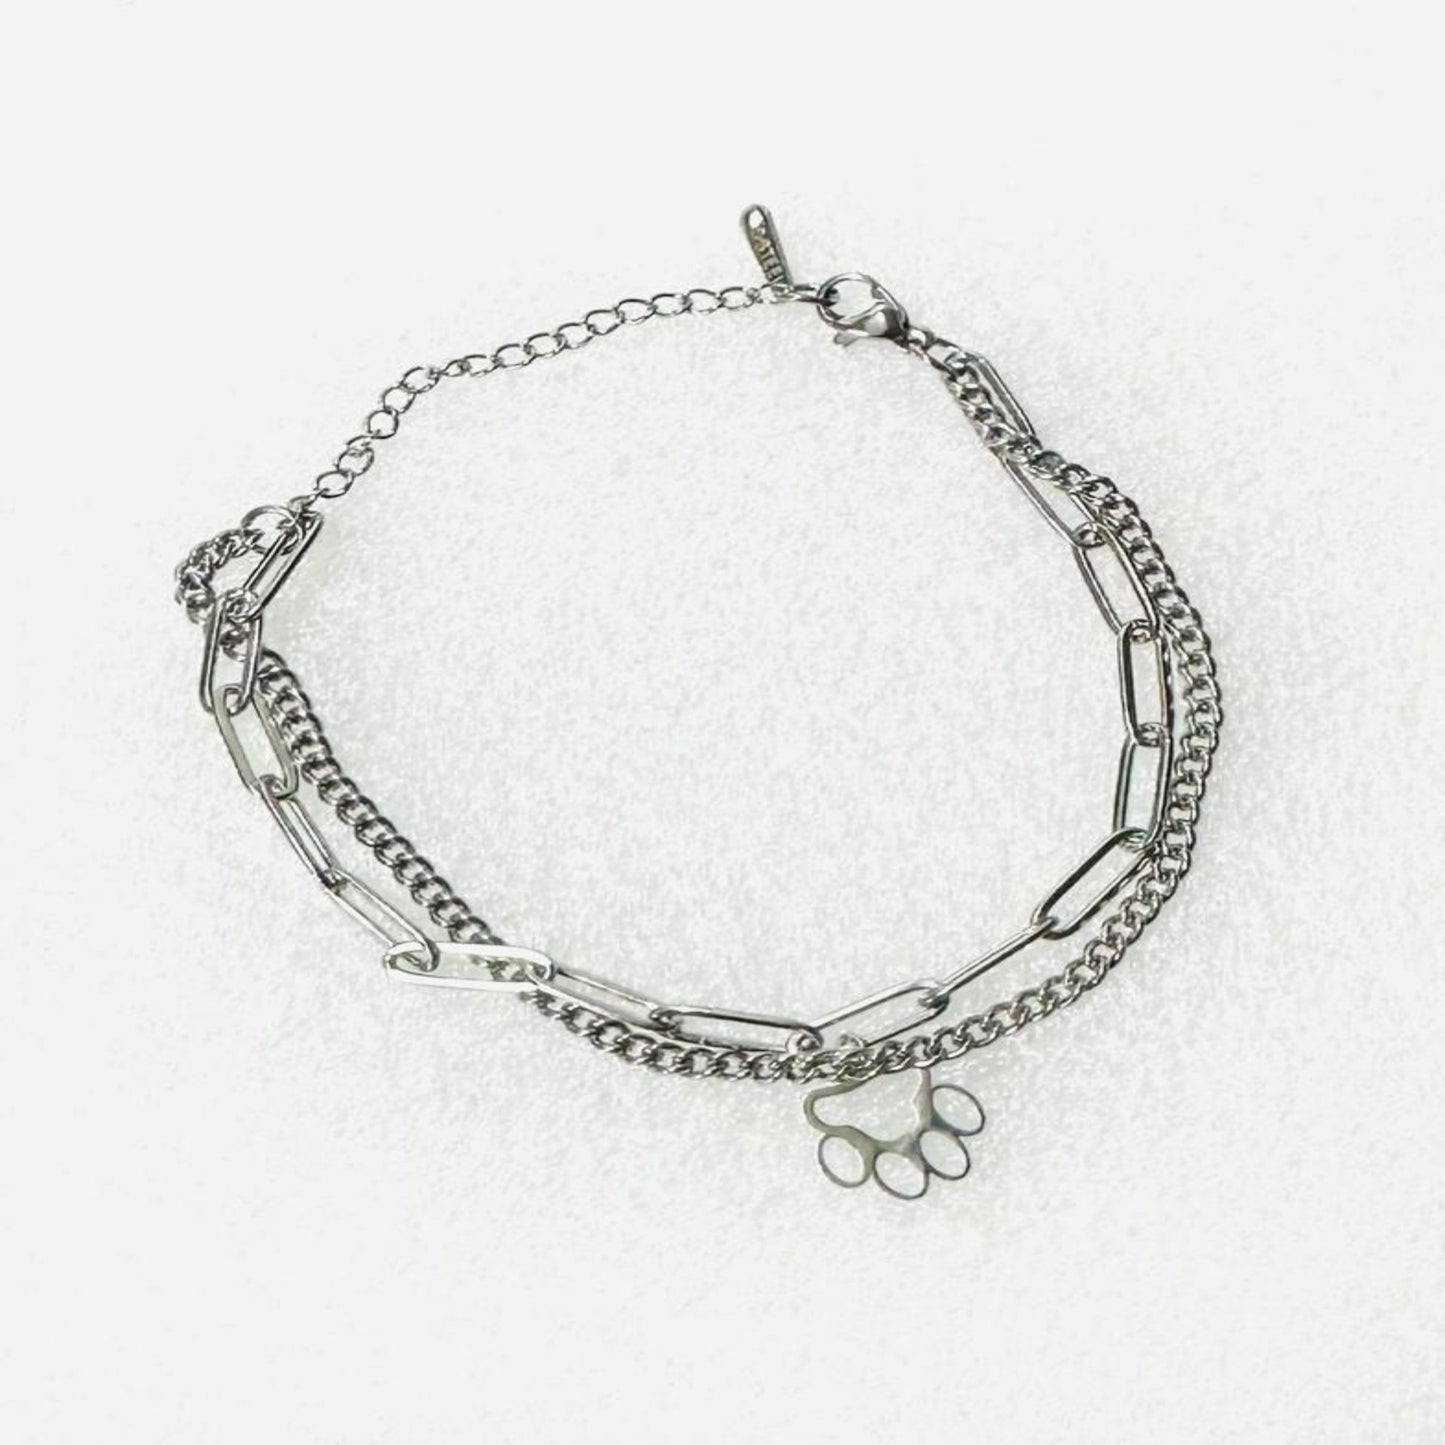 CHIC Stainless Steel Dog Paw Bracelet